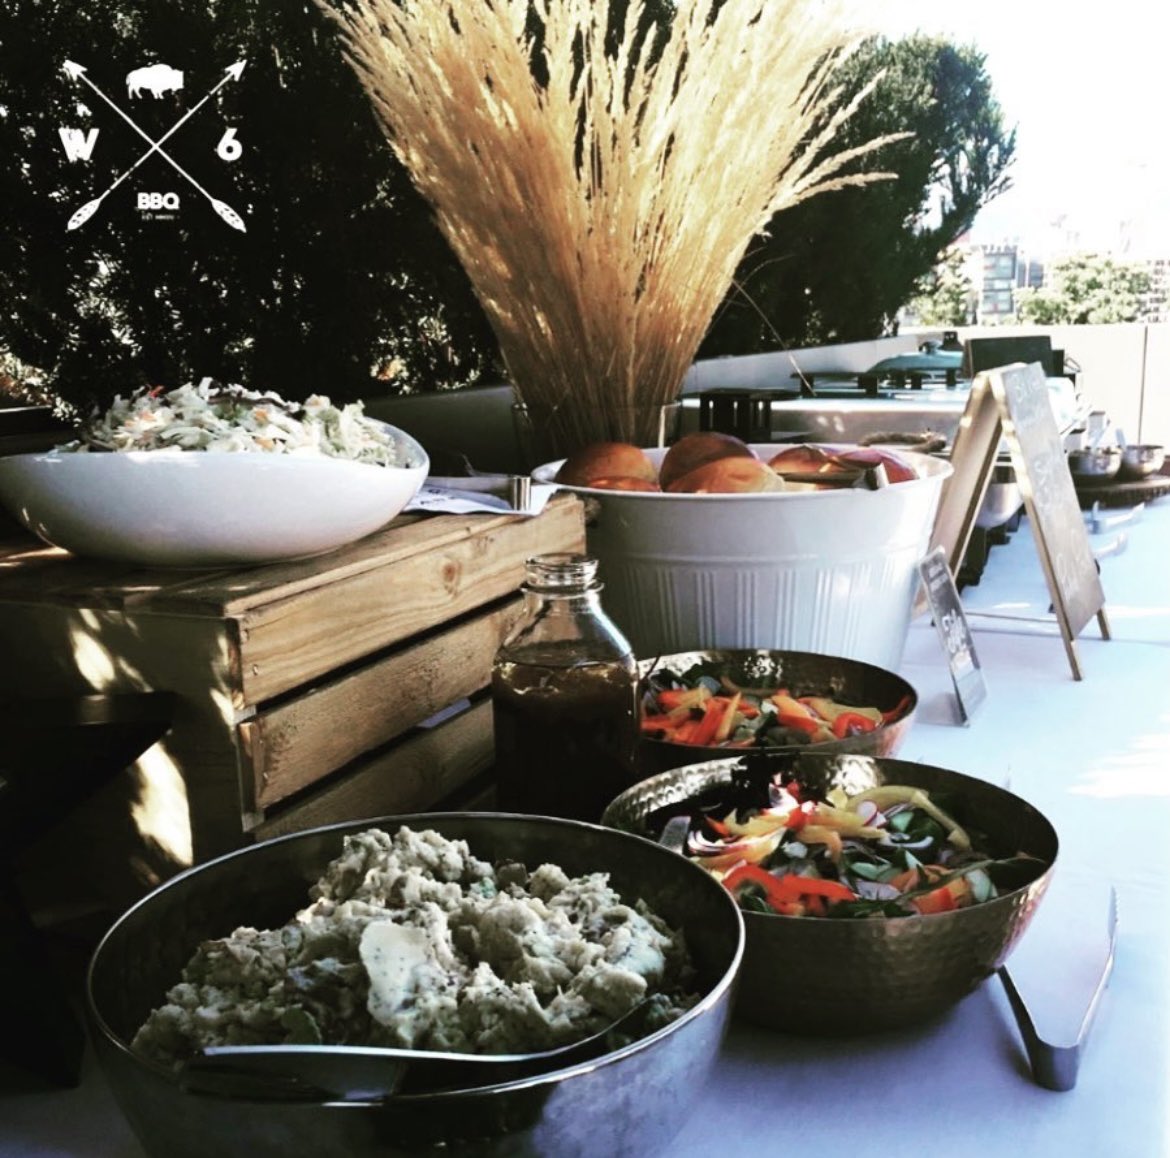 Whiskey Six Catering & Events loves catering family gatherings of any kind and size. Contact Marc at whiskeysixbbq.com for your custom menu & quote.
#westcoastbbq #modernbbq #organicbbq #gathering #birthday #celebrate #babyshower #weddingcatering #bbqcatering #familyfood